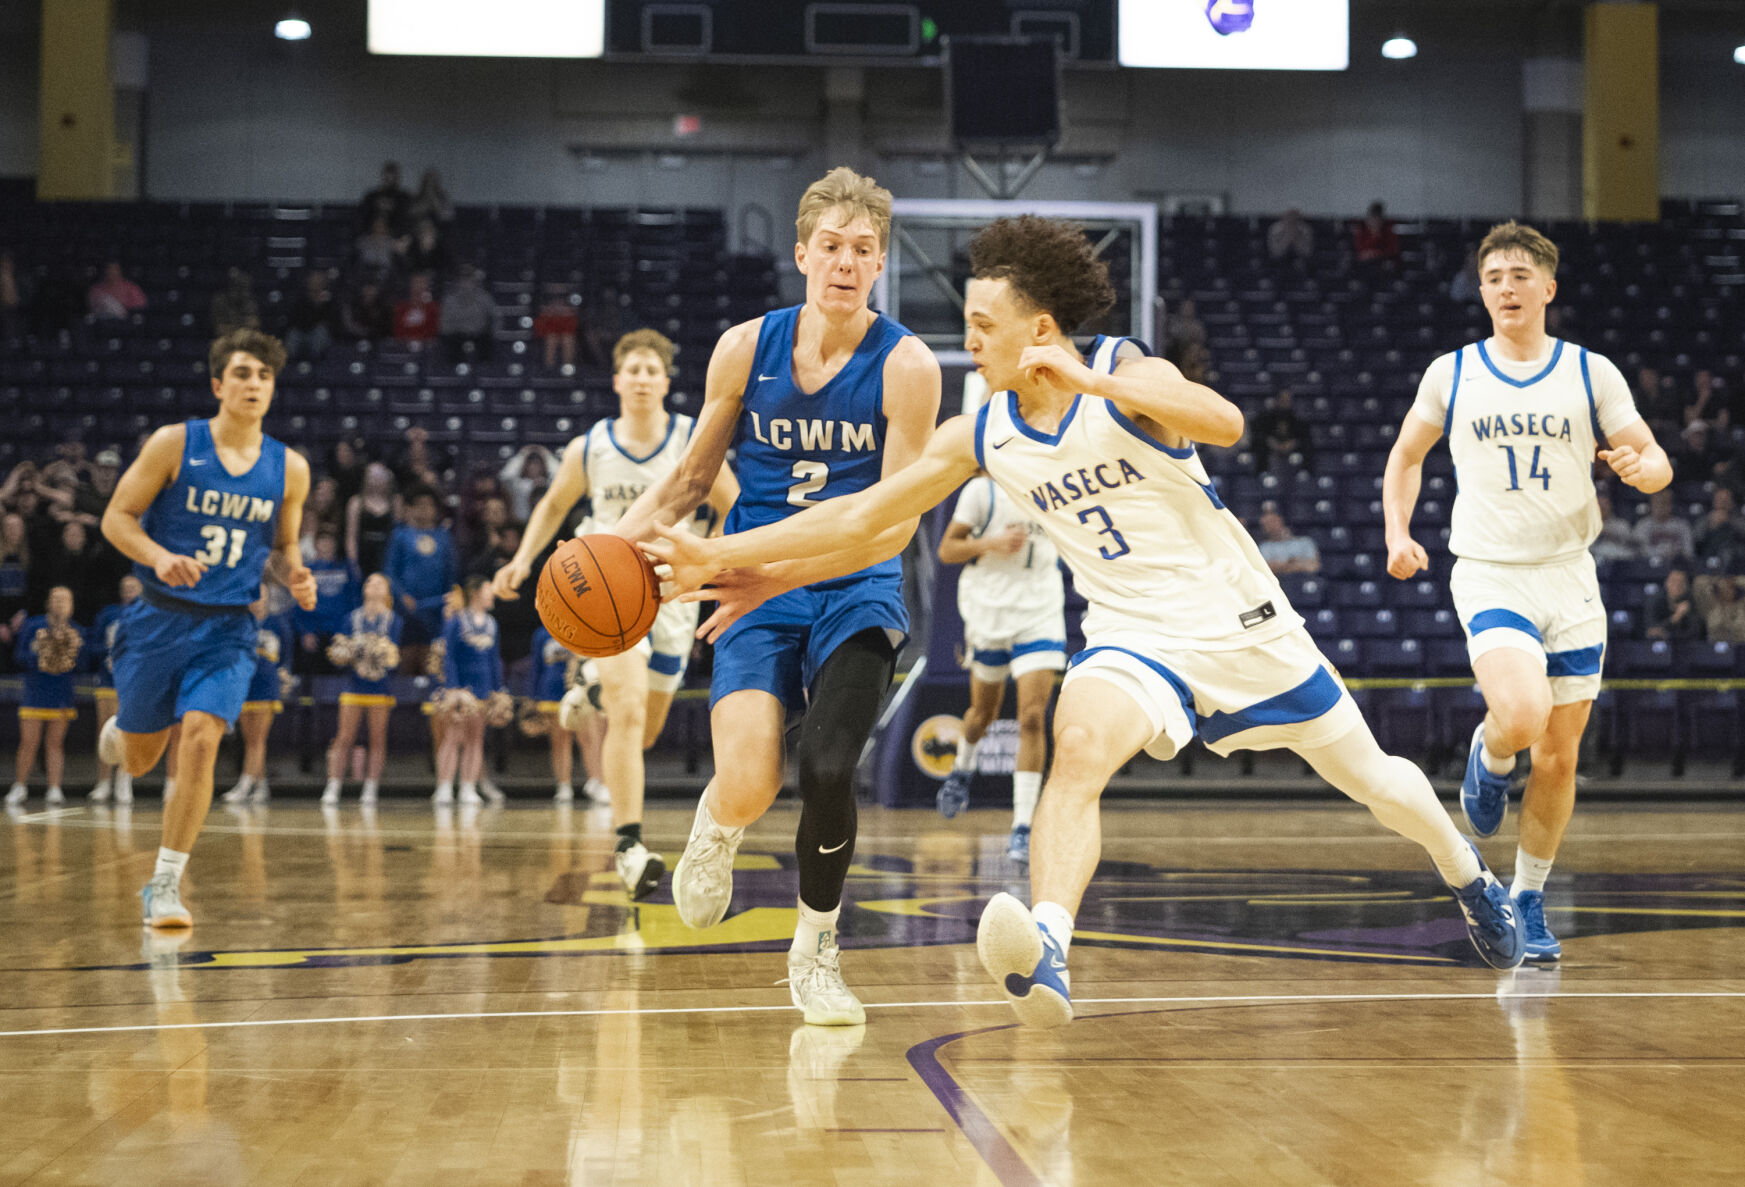 Waseca boys basketball team poised to battle No. 1-seeded Breck in state tournament opener